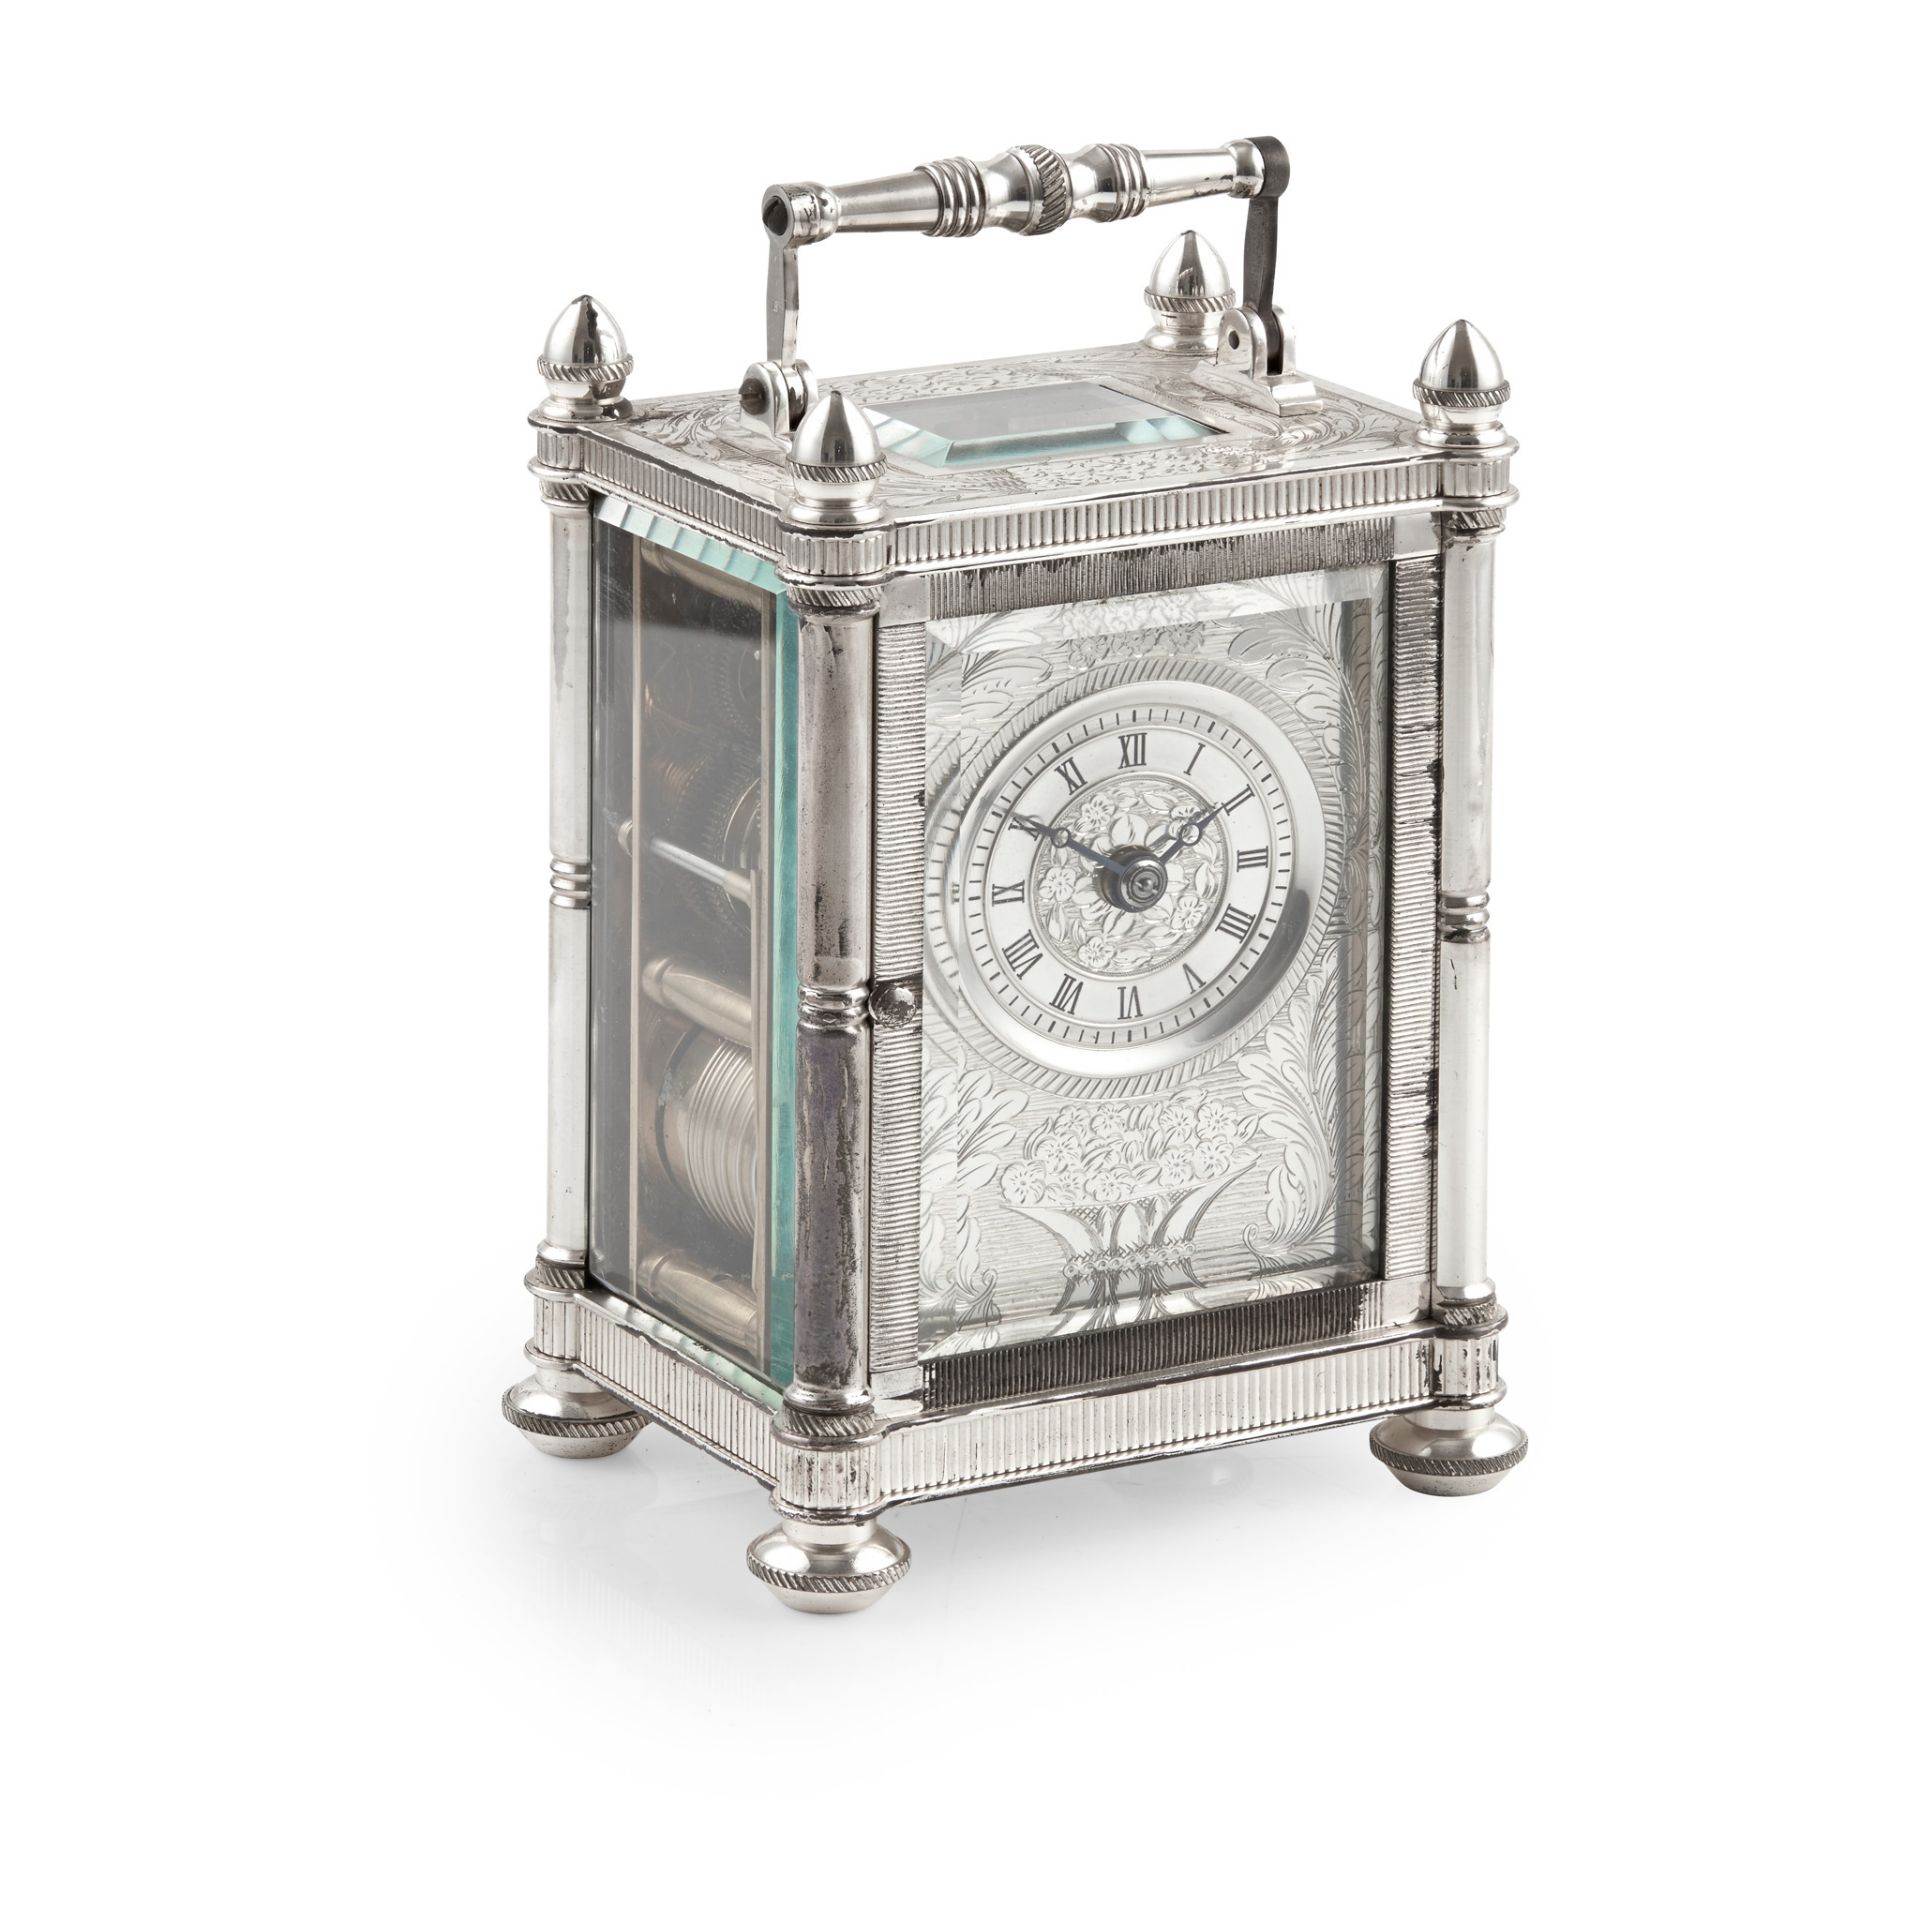 The Mappin & Webb Bi-centenary carriage clock - Image 2 of 4